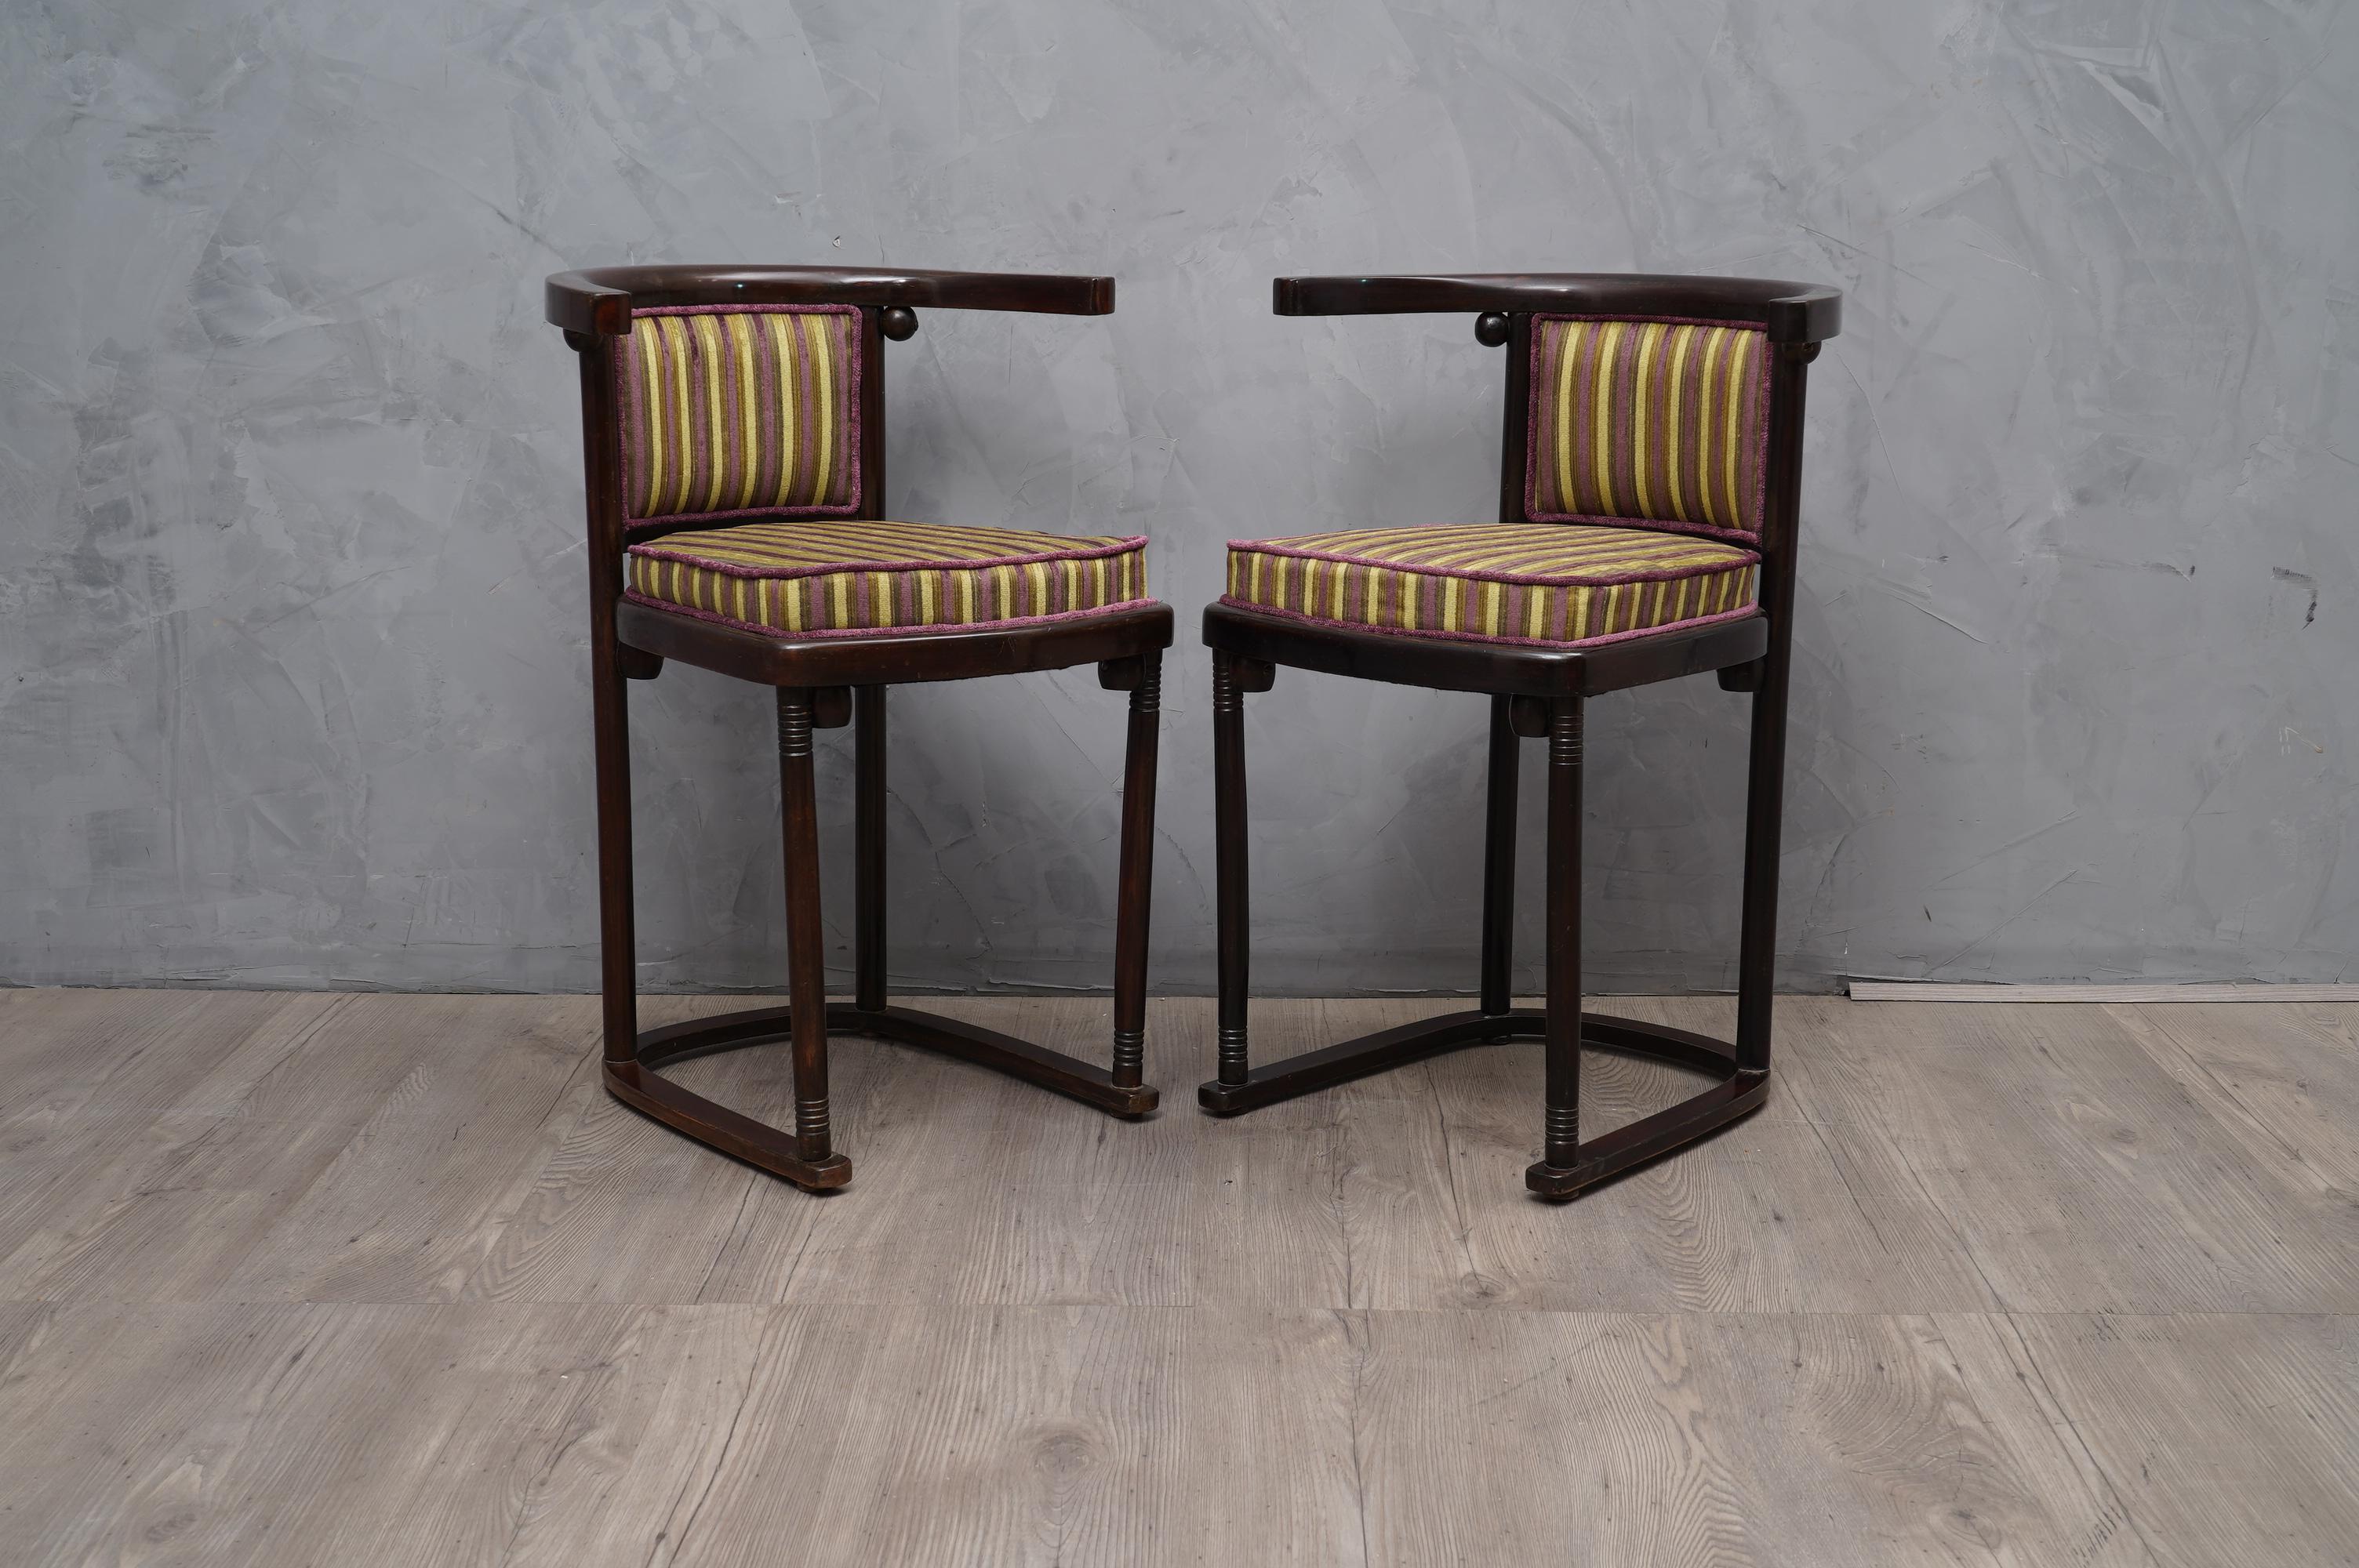 Early 20th Century Pair of Art Nouveau Beech Wood and Striped Velvet Austrian Chairs, 1910 For Sale